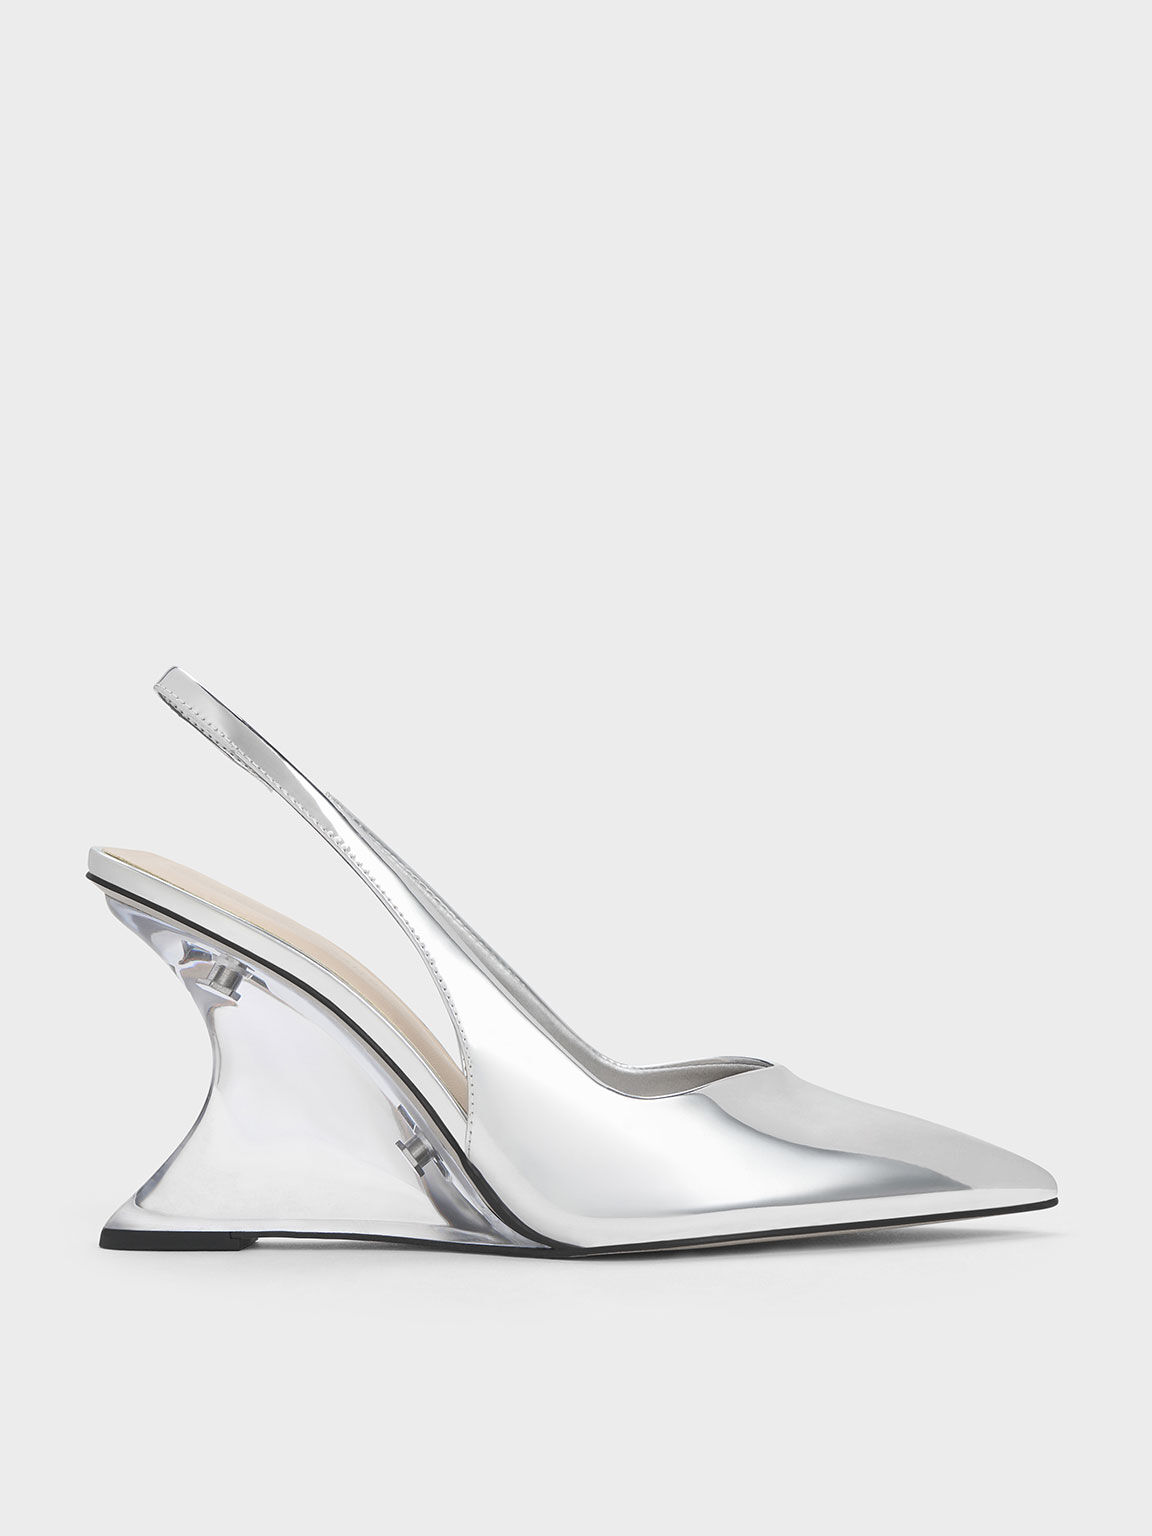 Charles & Keith Sling Back Statement Heeled Shoes in Silver